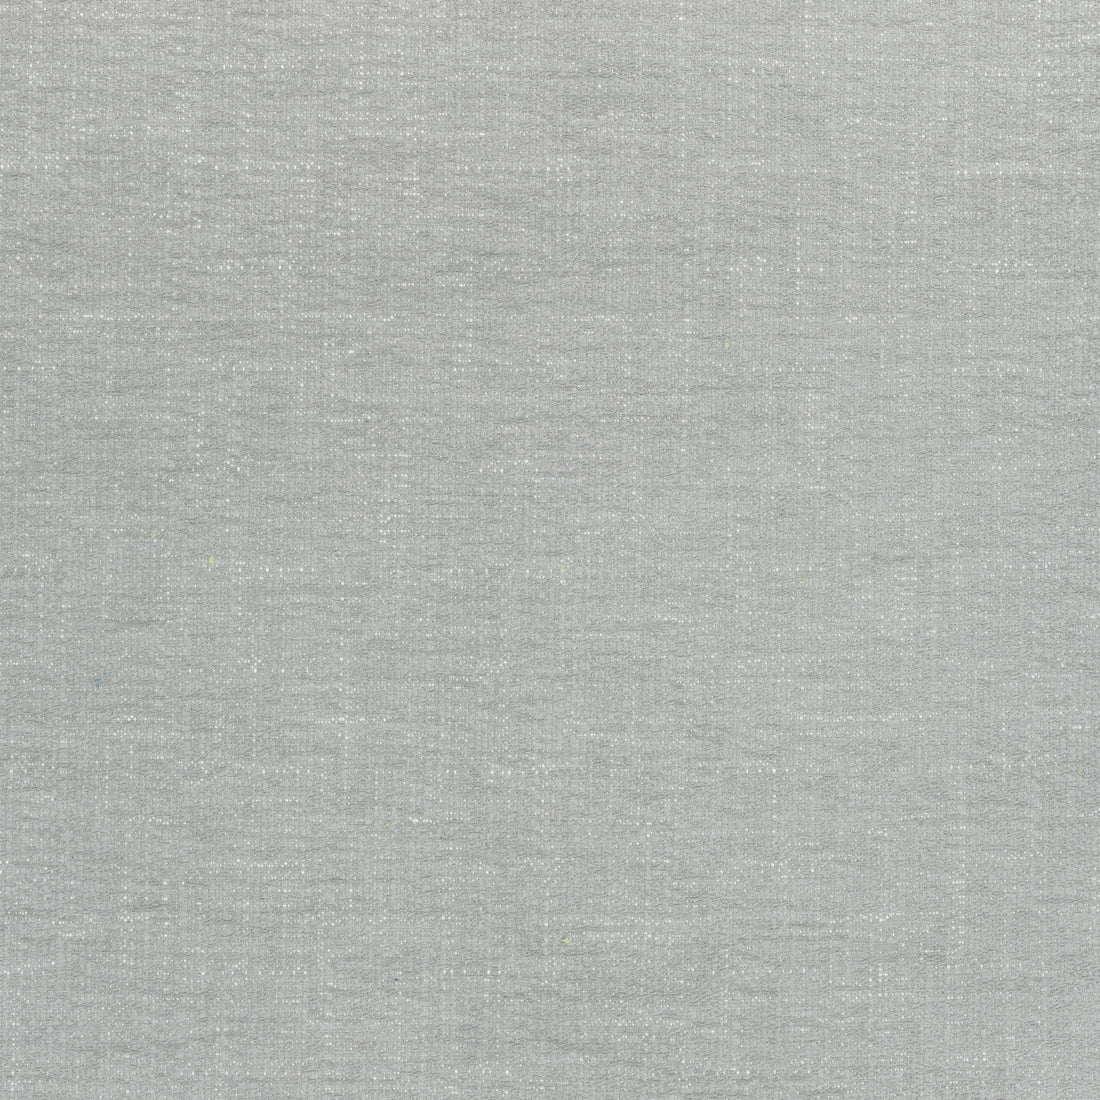 Vista fabric in nickel color - pattern number W73399 - by Thibaut in the Landmark Textures collection